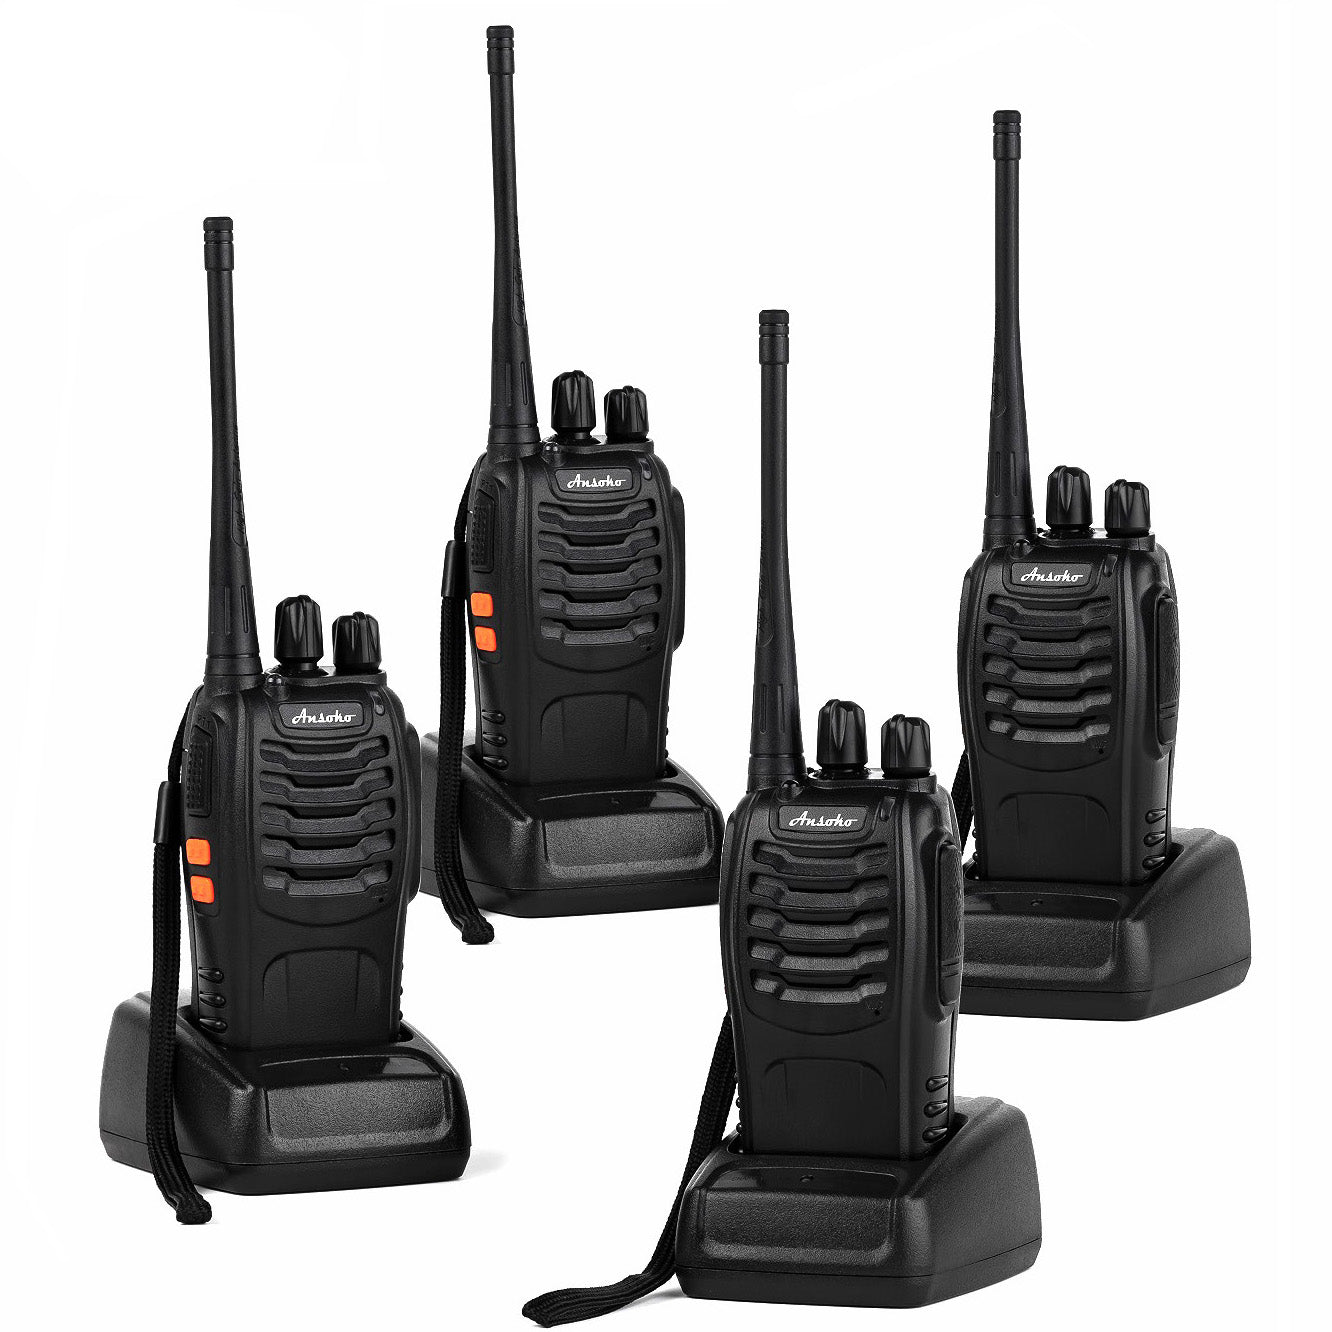 Arcshell Rechargeable Long Range Two-Way Radios with Earpiece Headsets Pack Arcshell AR-6 Walkie Talkies Li-ion Battery and Charger Included - 2